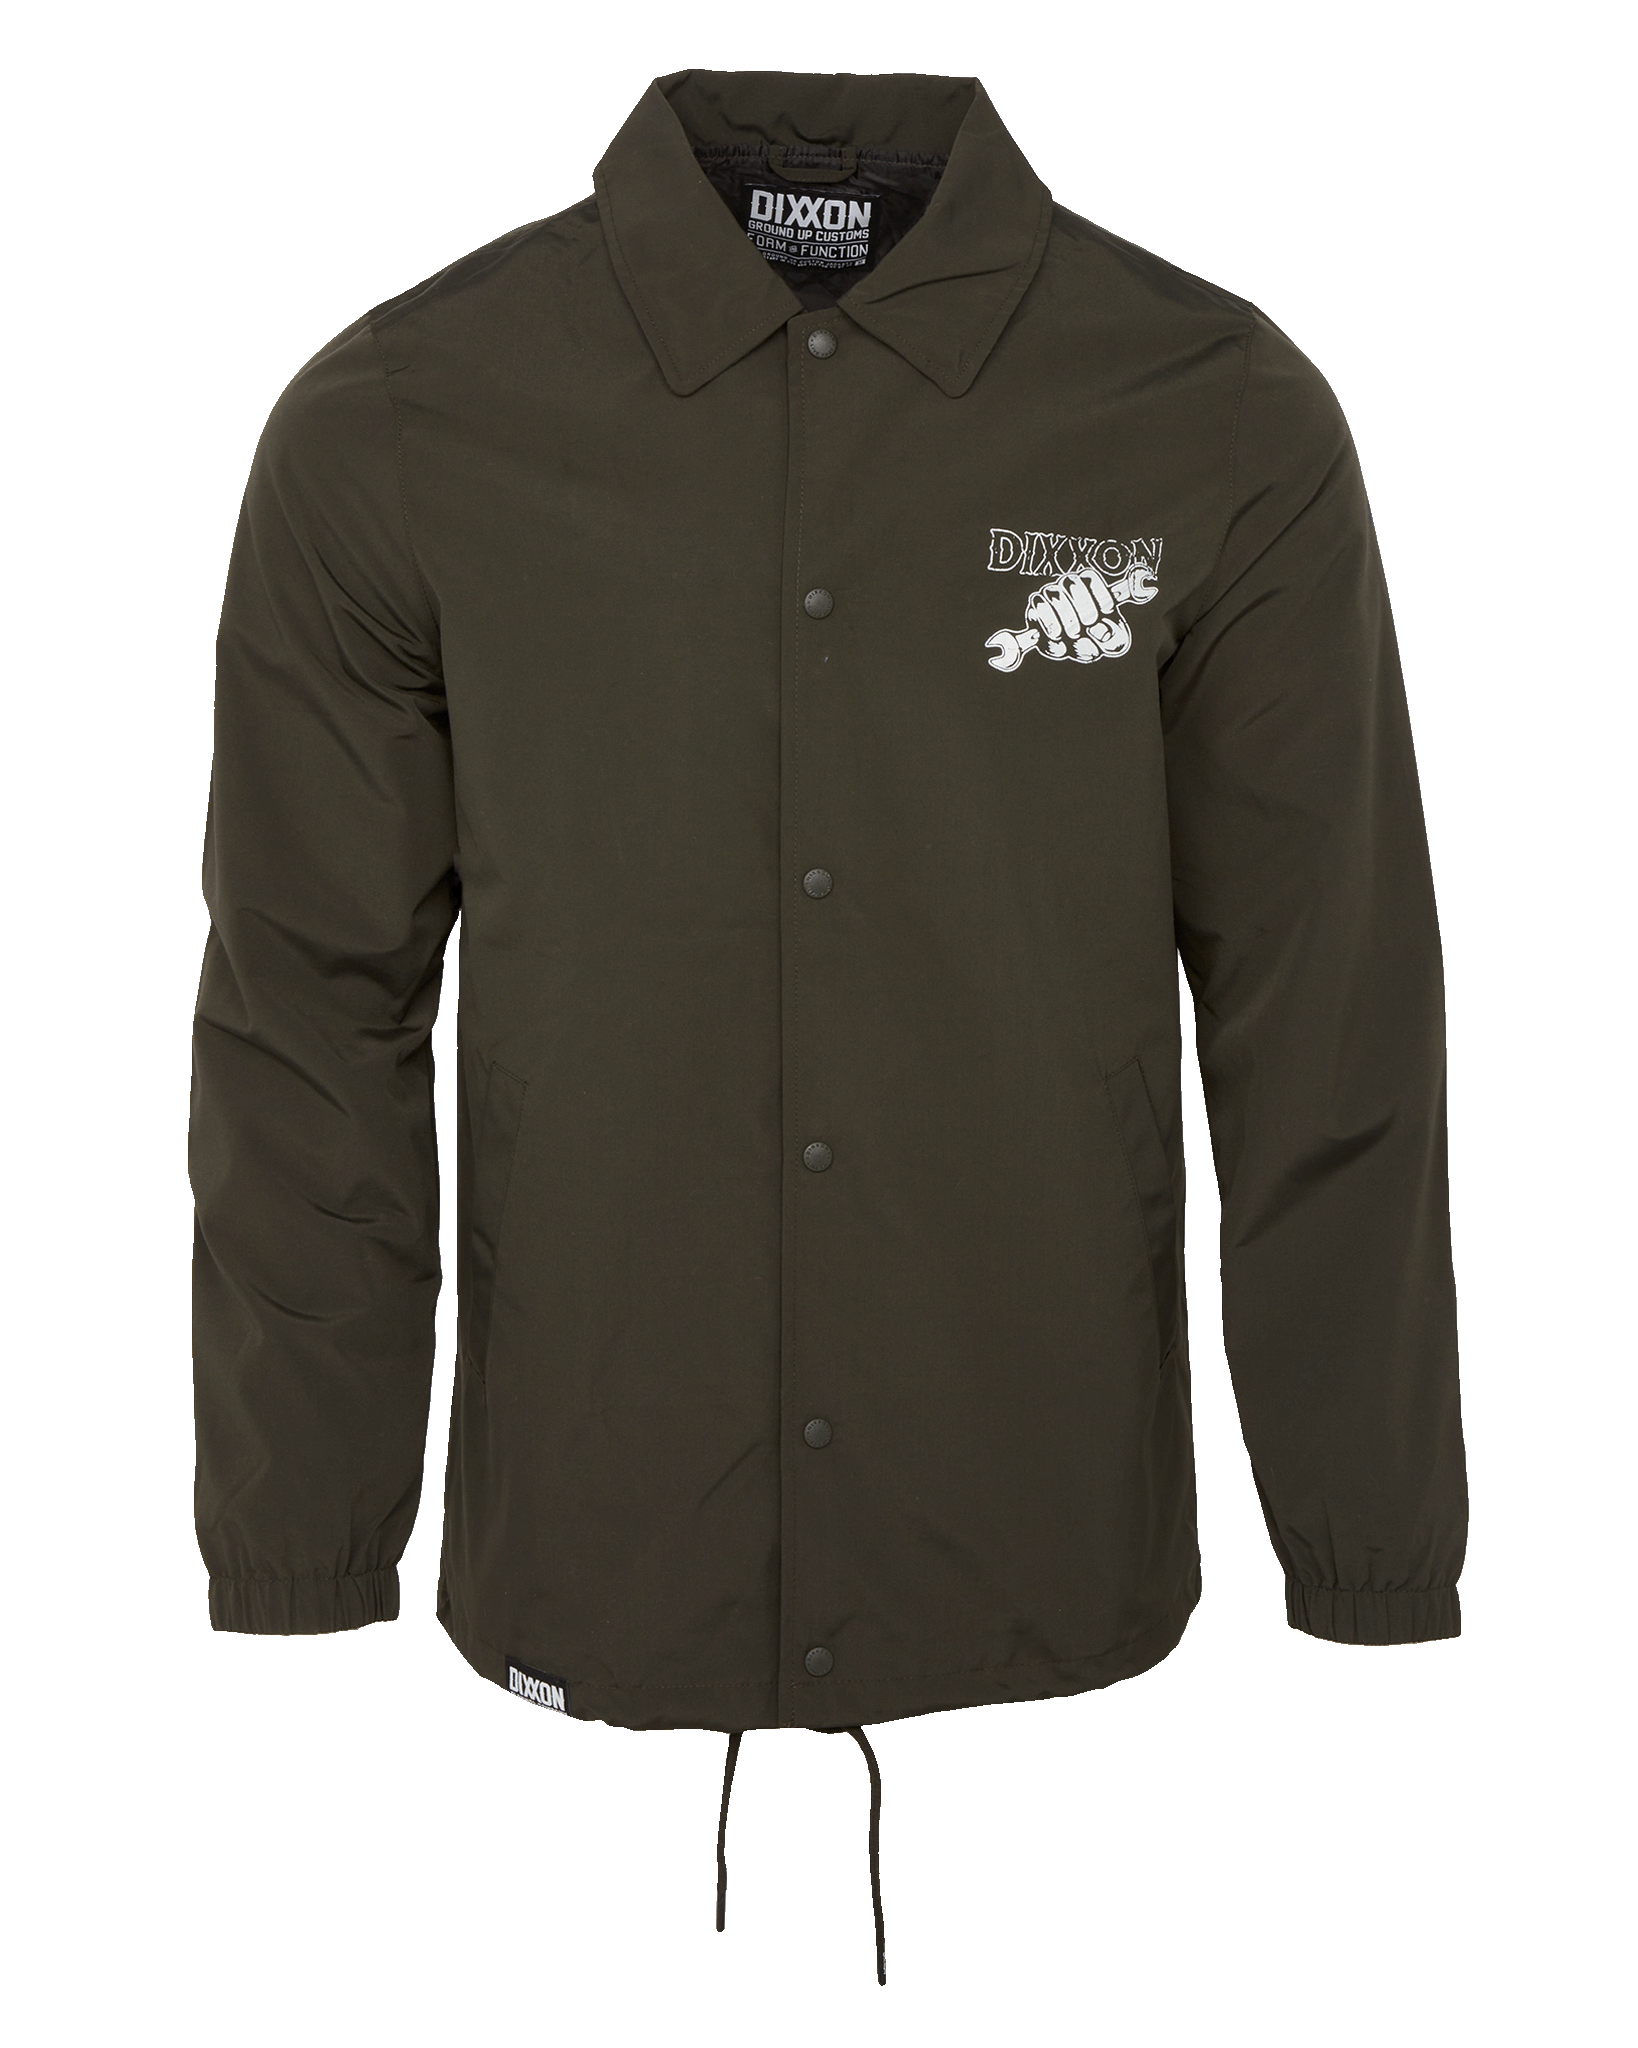 Working Class Fist Coaches Jacket